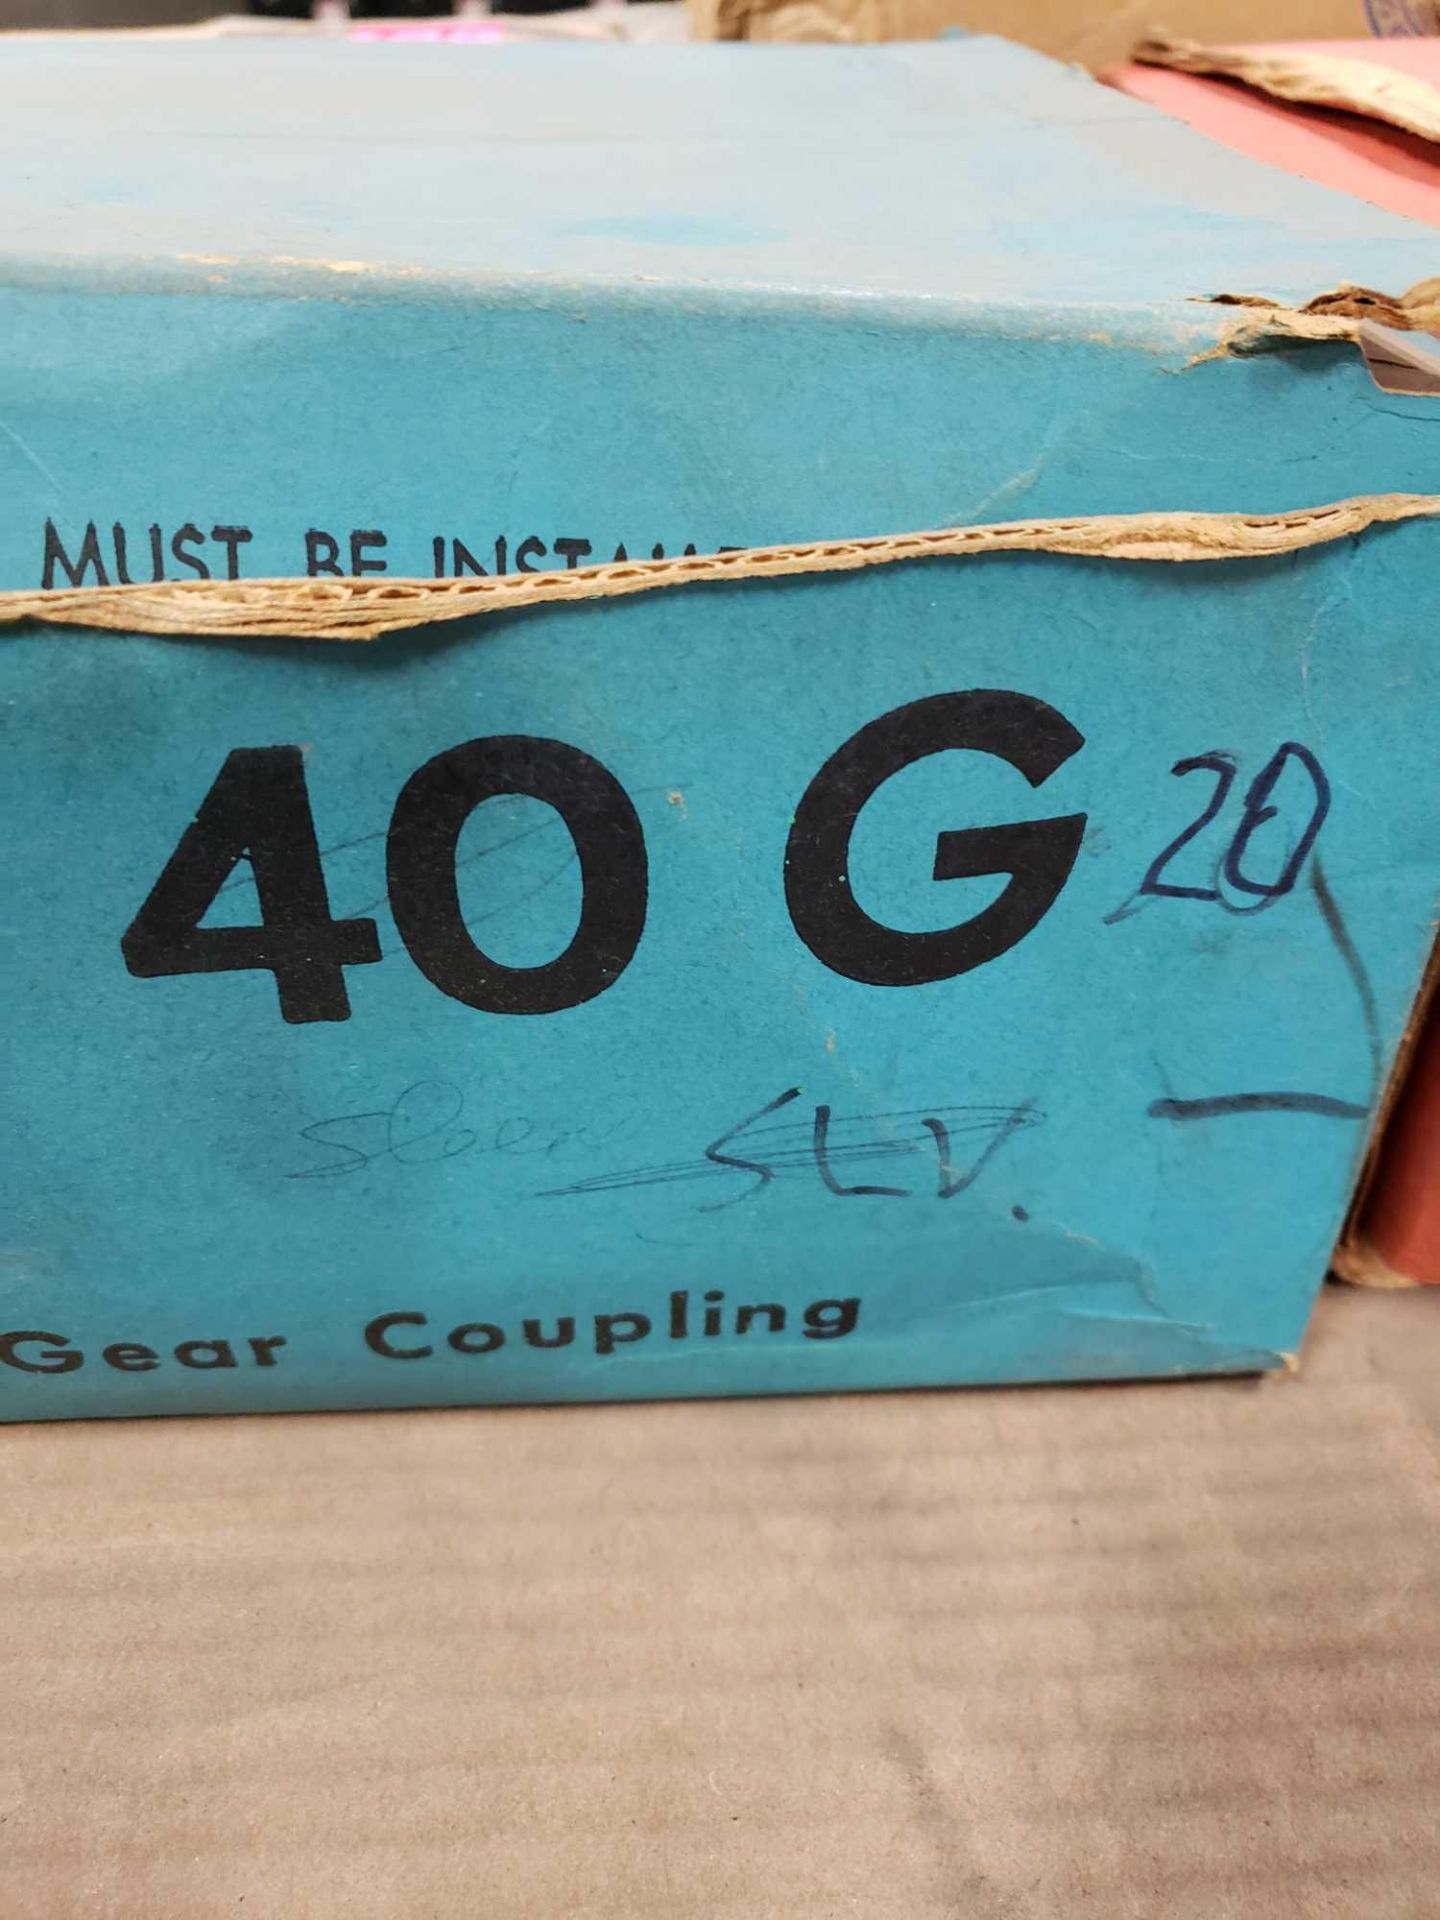 Falk 40G20 coupling component. New in box. - Image 2 of 3